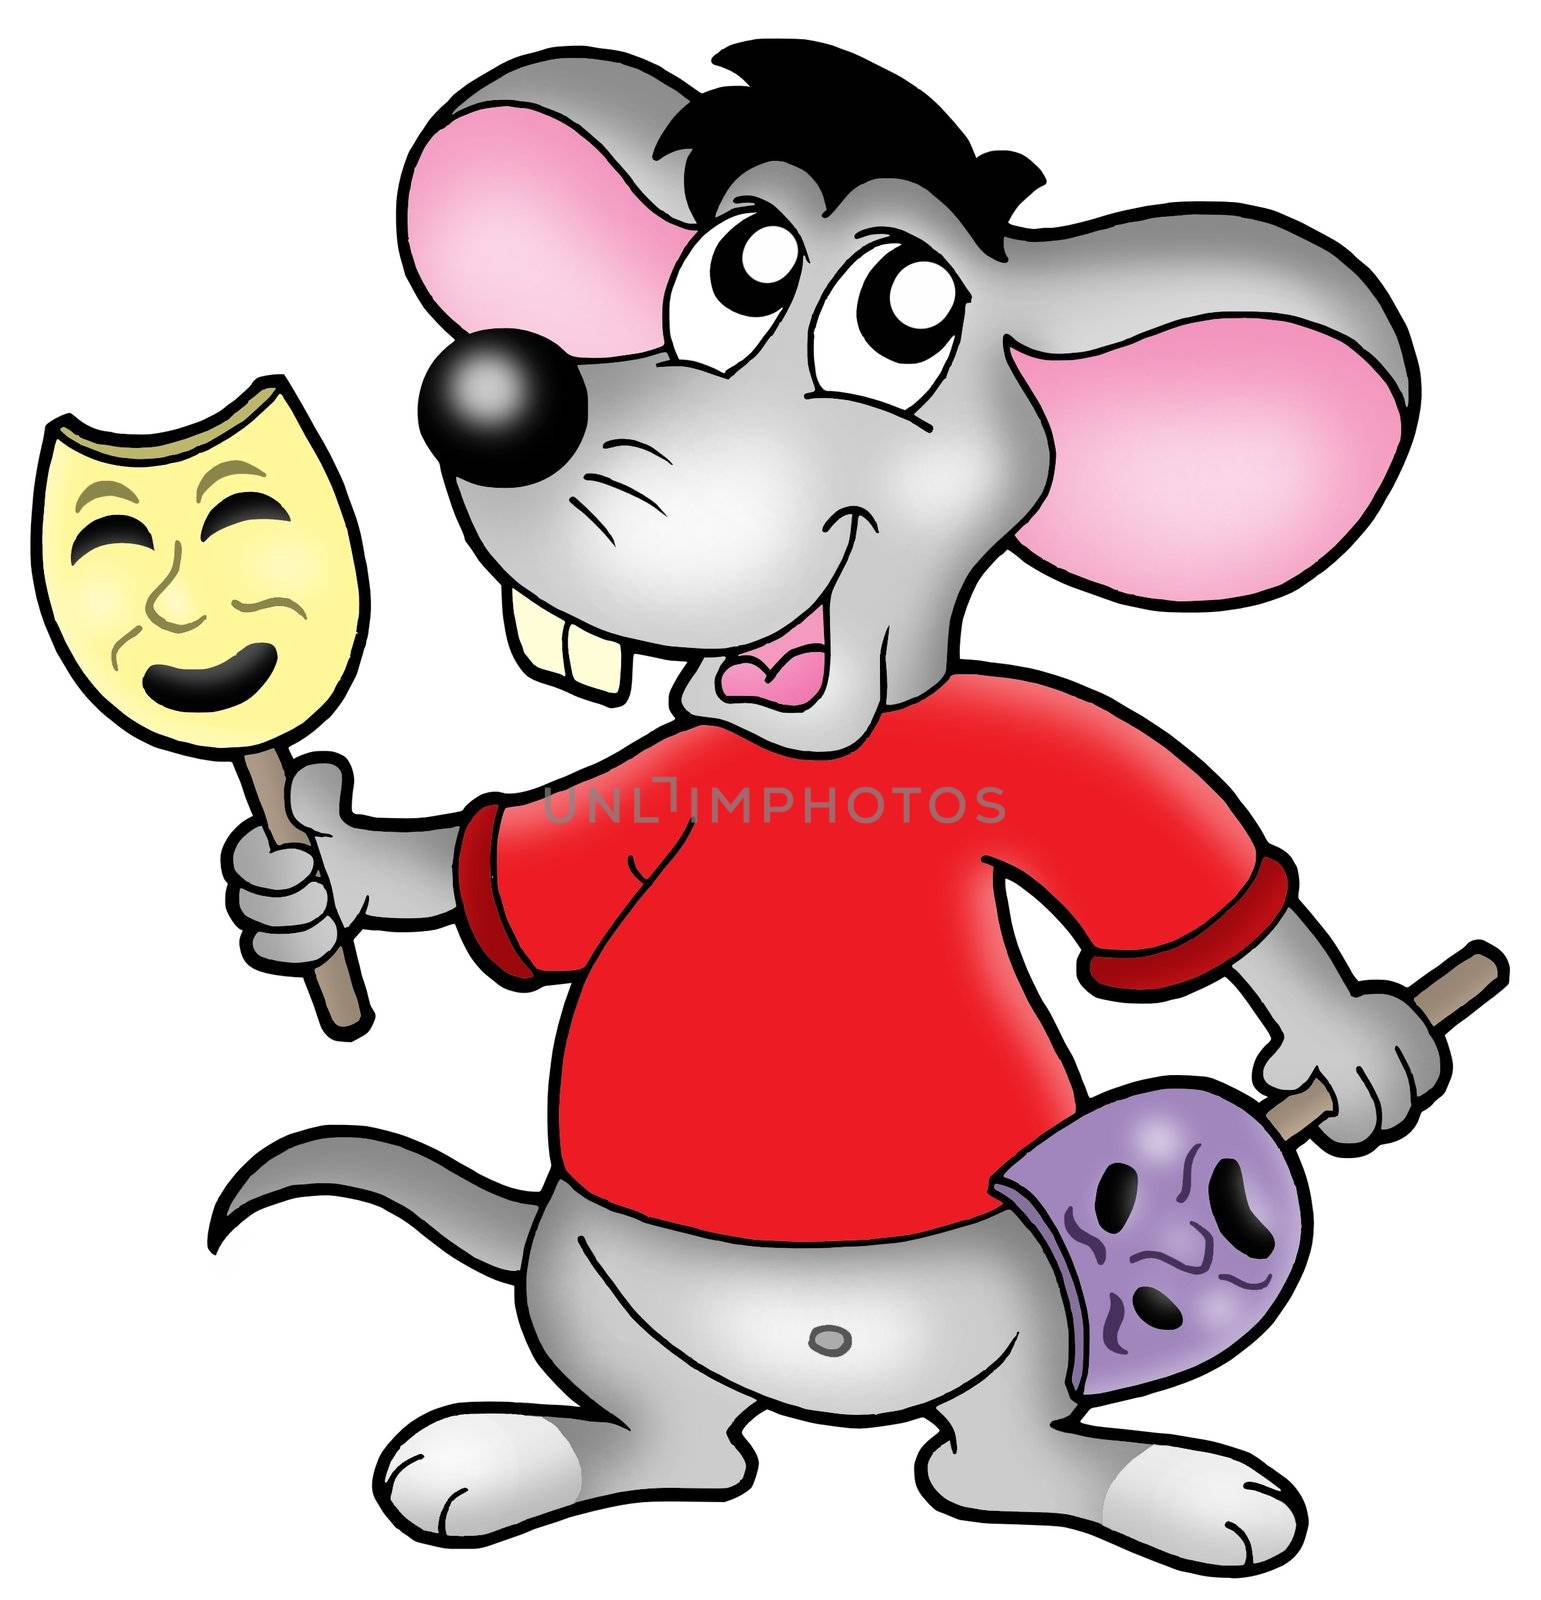 Caroon mouse actor by clairev